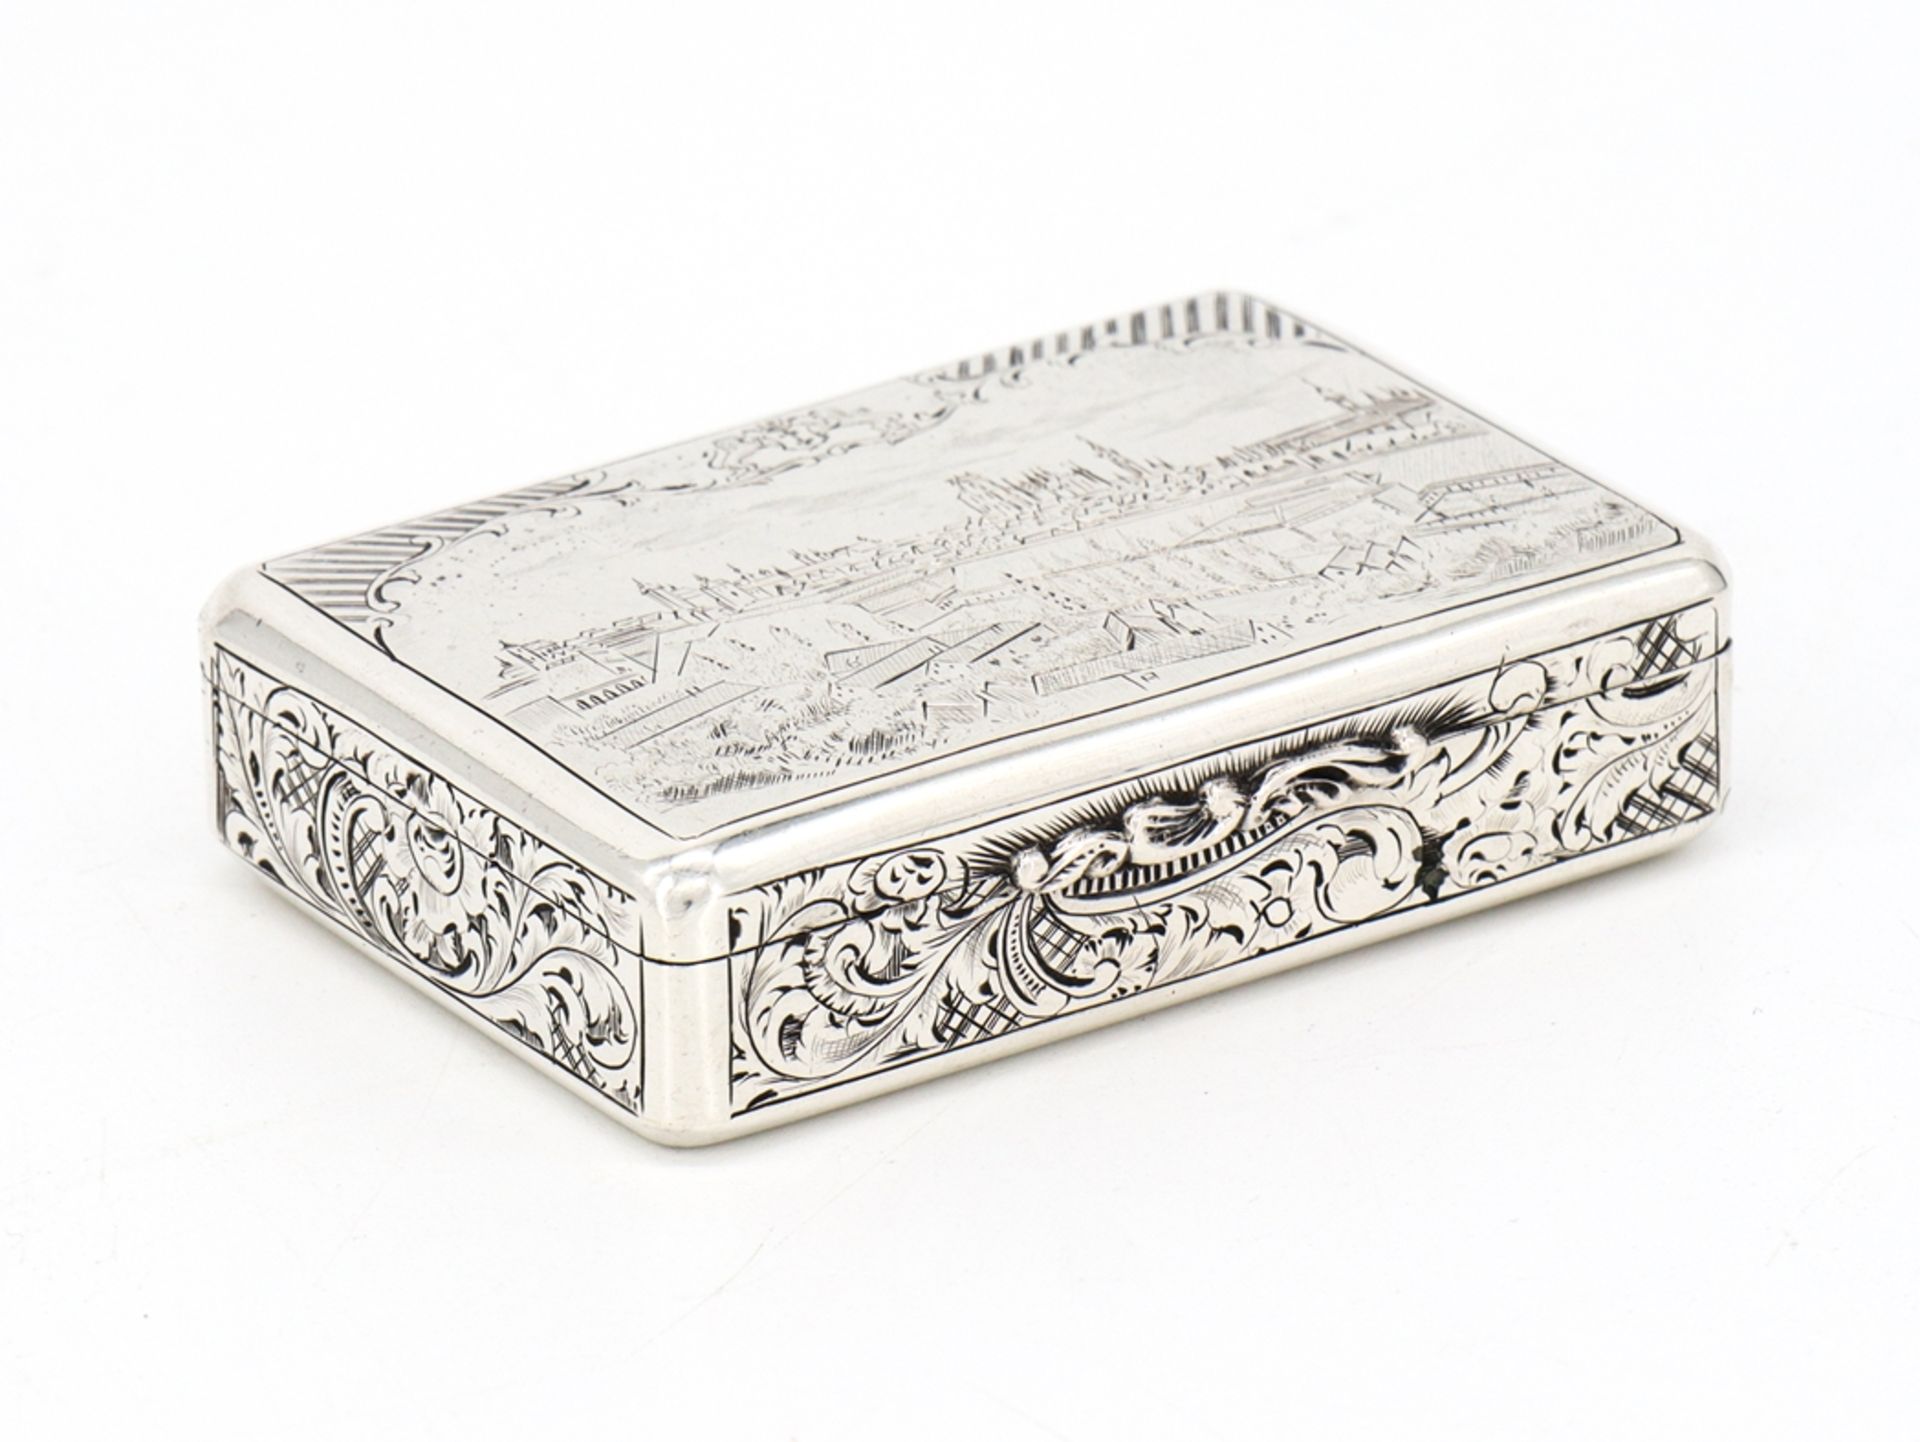 Match silver case with finely chased city view, around 1850 - Image 5 of 9